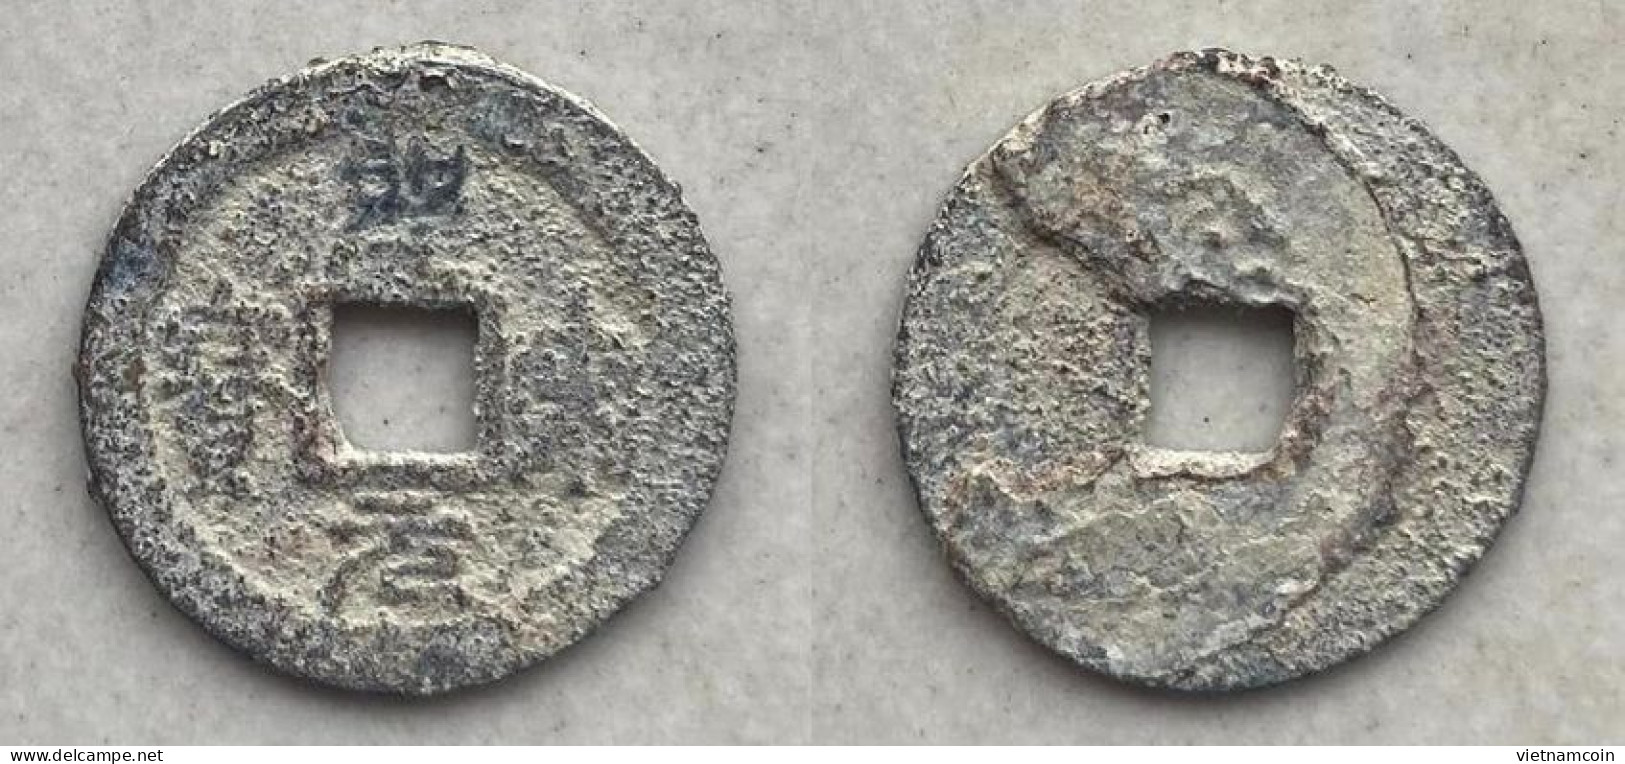 Ancient Annam Coin  Thanh Tong Nguyen Bao ( Thieu Phu Group) - Copper THE NGUYEN LORDS (1558-1778) - Vietnam